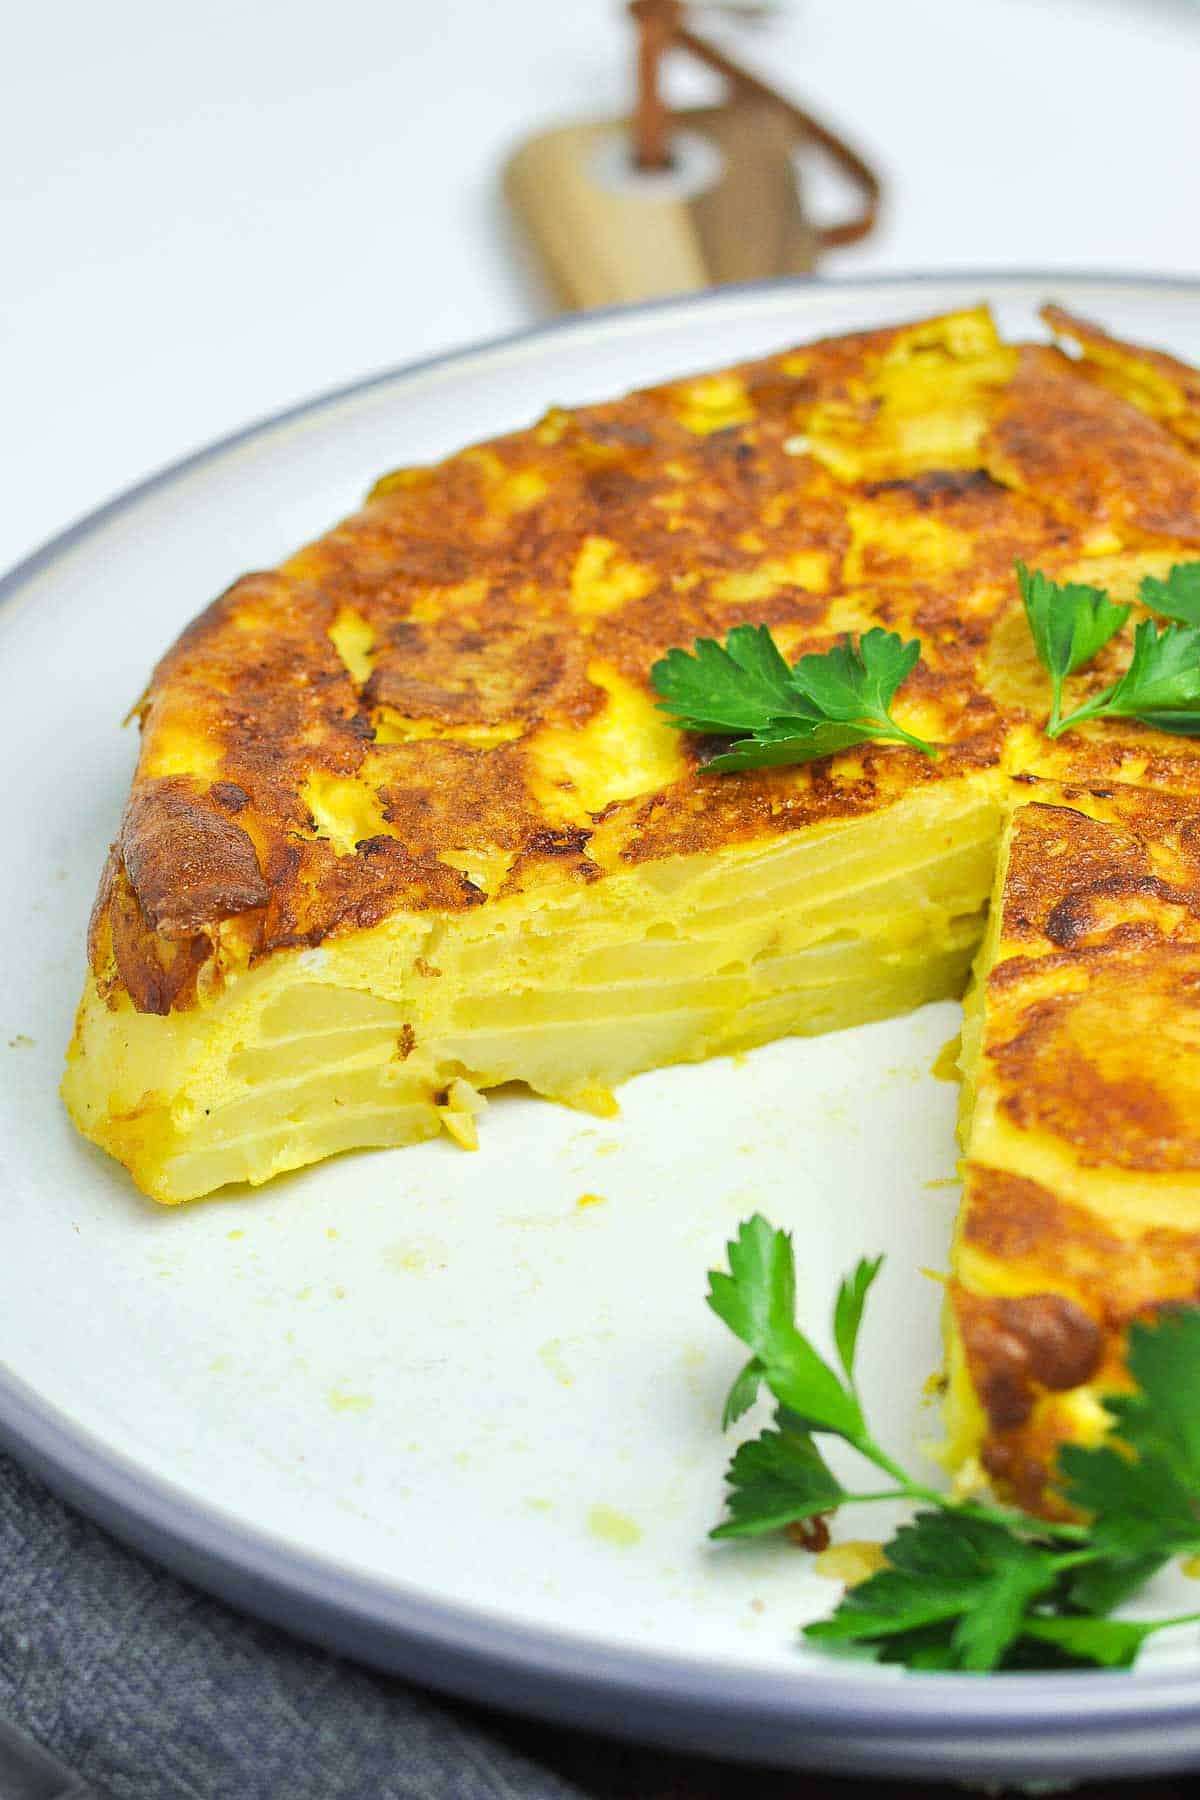 Close up view of the inside of a Spanish tortilla showing the layered potatoes.